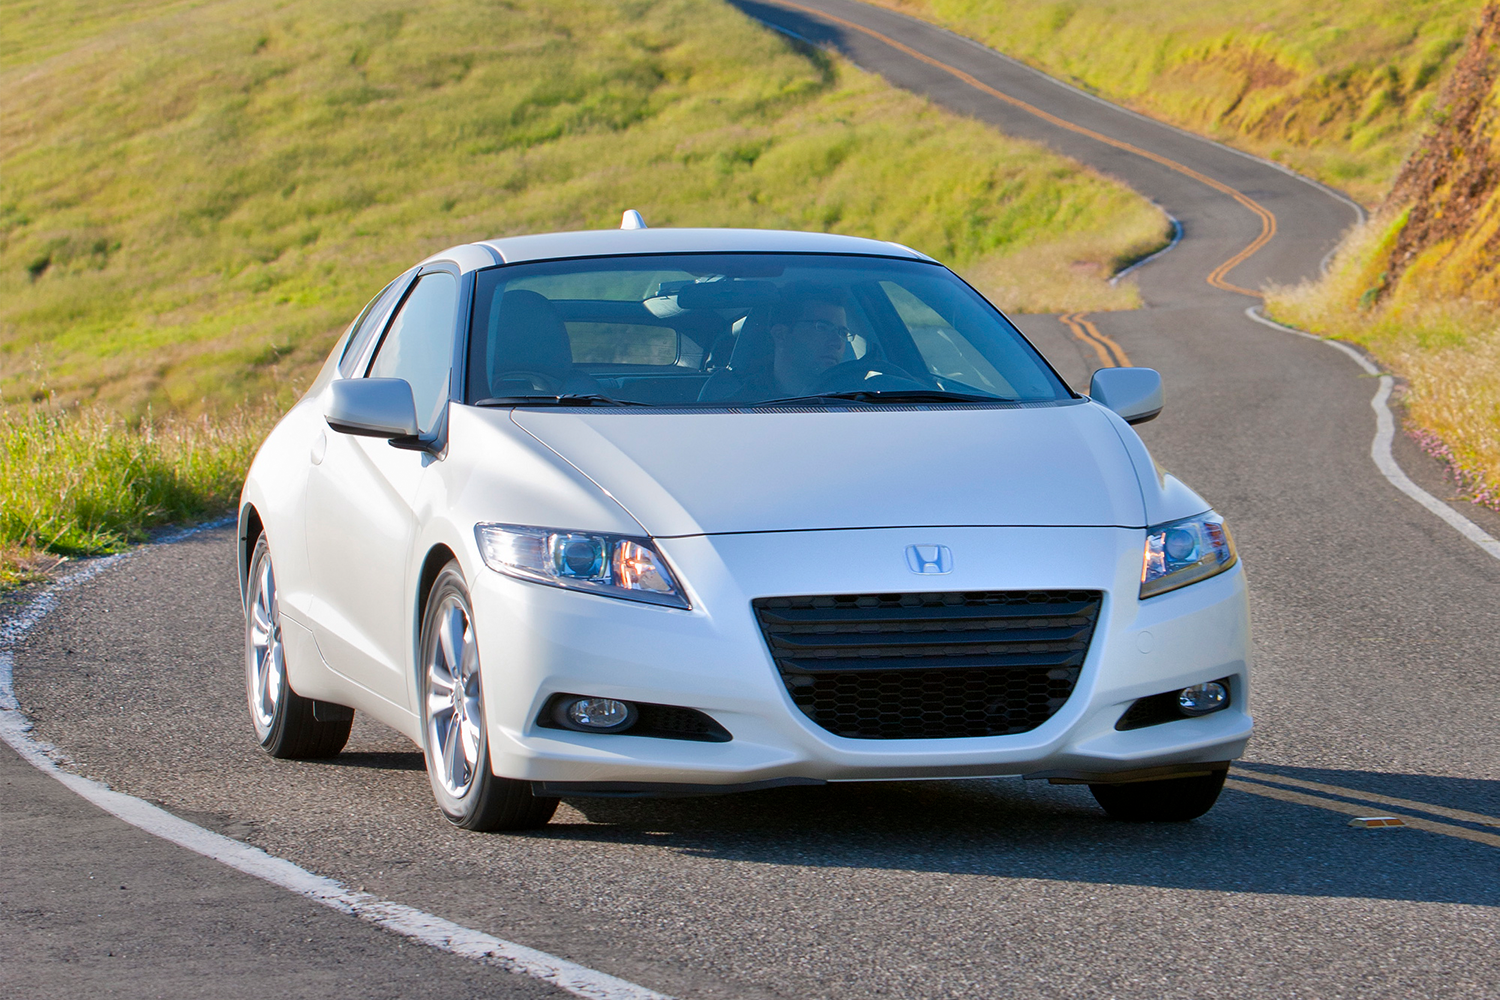 A white 2011 Honda CR-Z EX hybrid driving down a windy road in the countryside